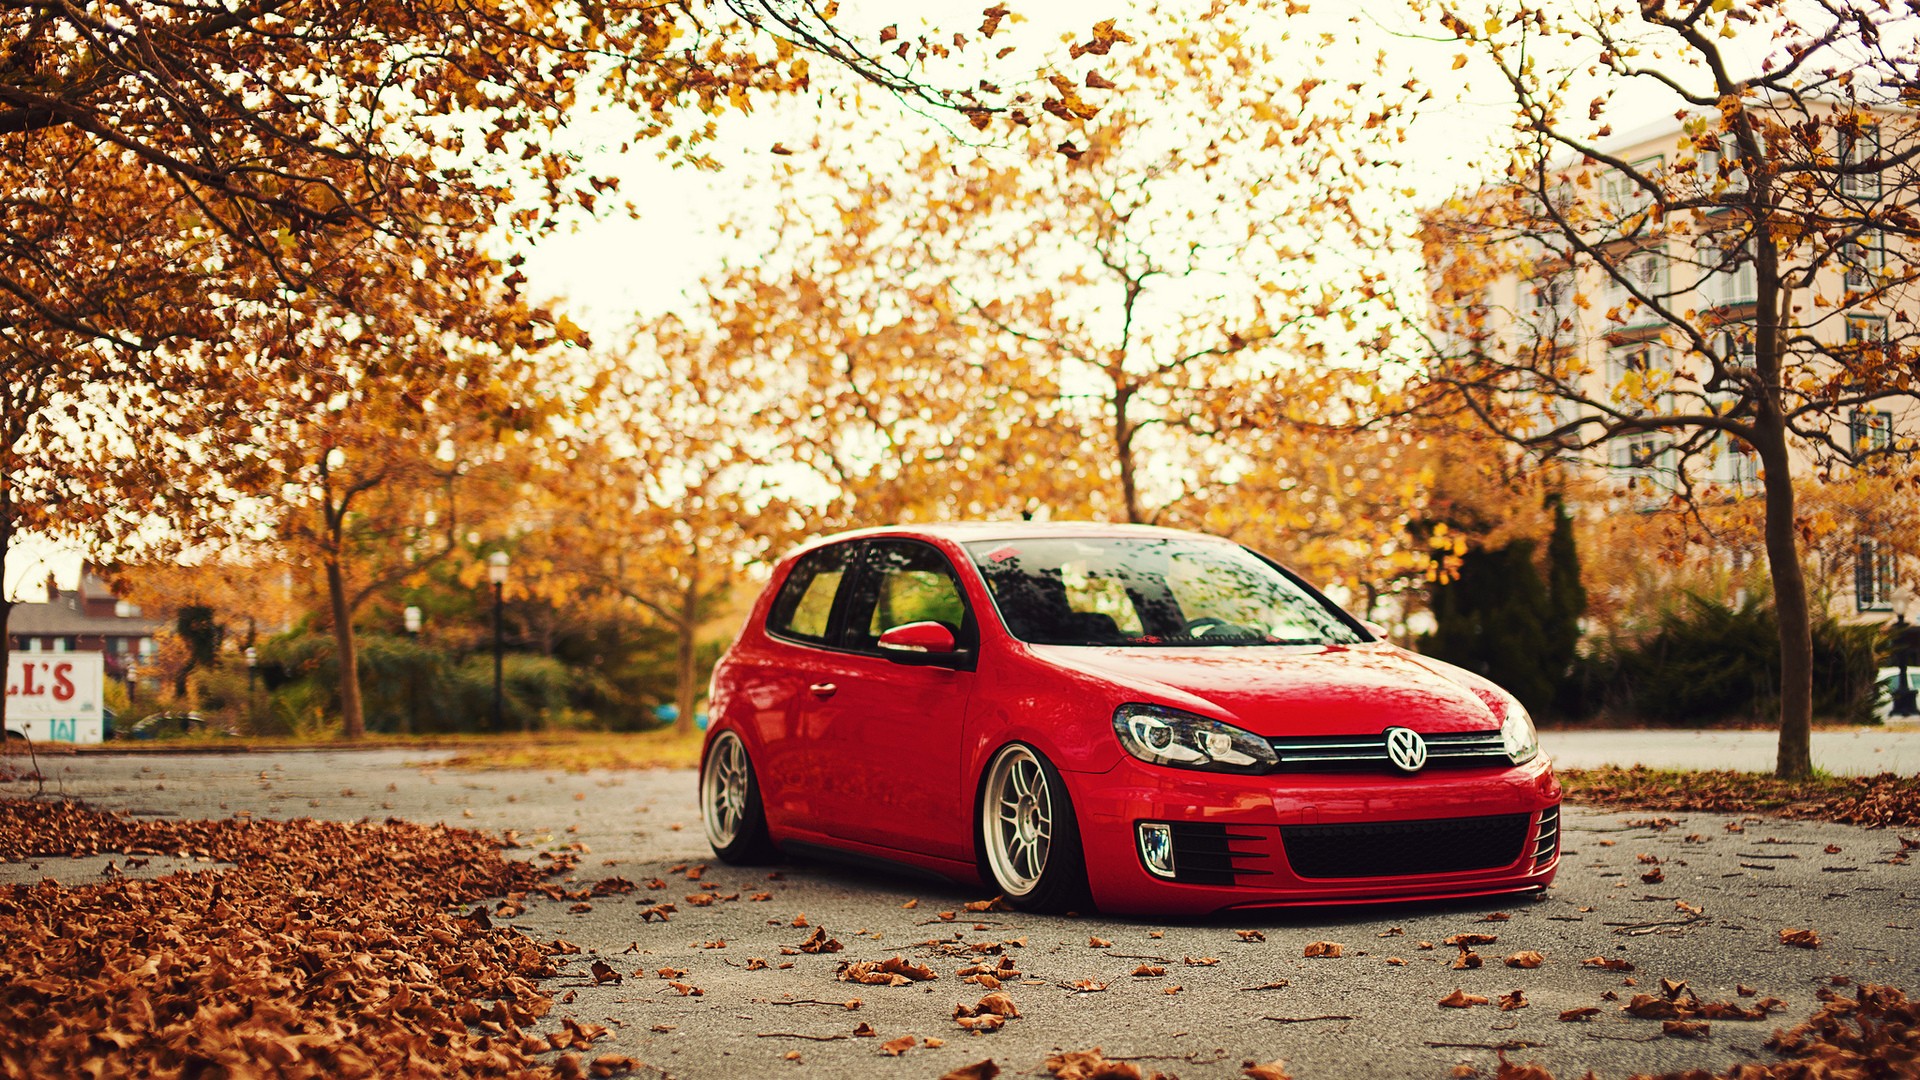 The Autumn Gti Stance Wallpaper iPhone